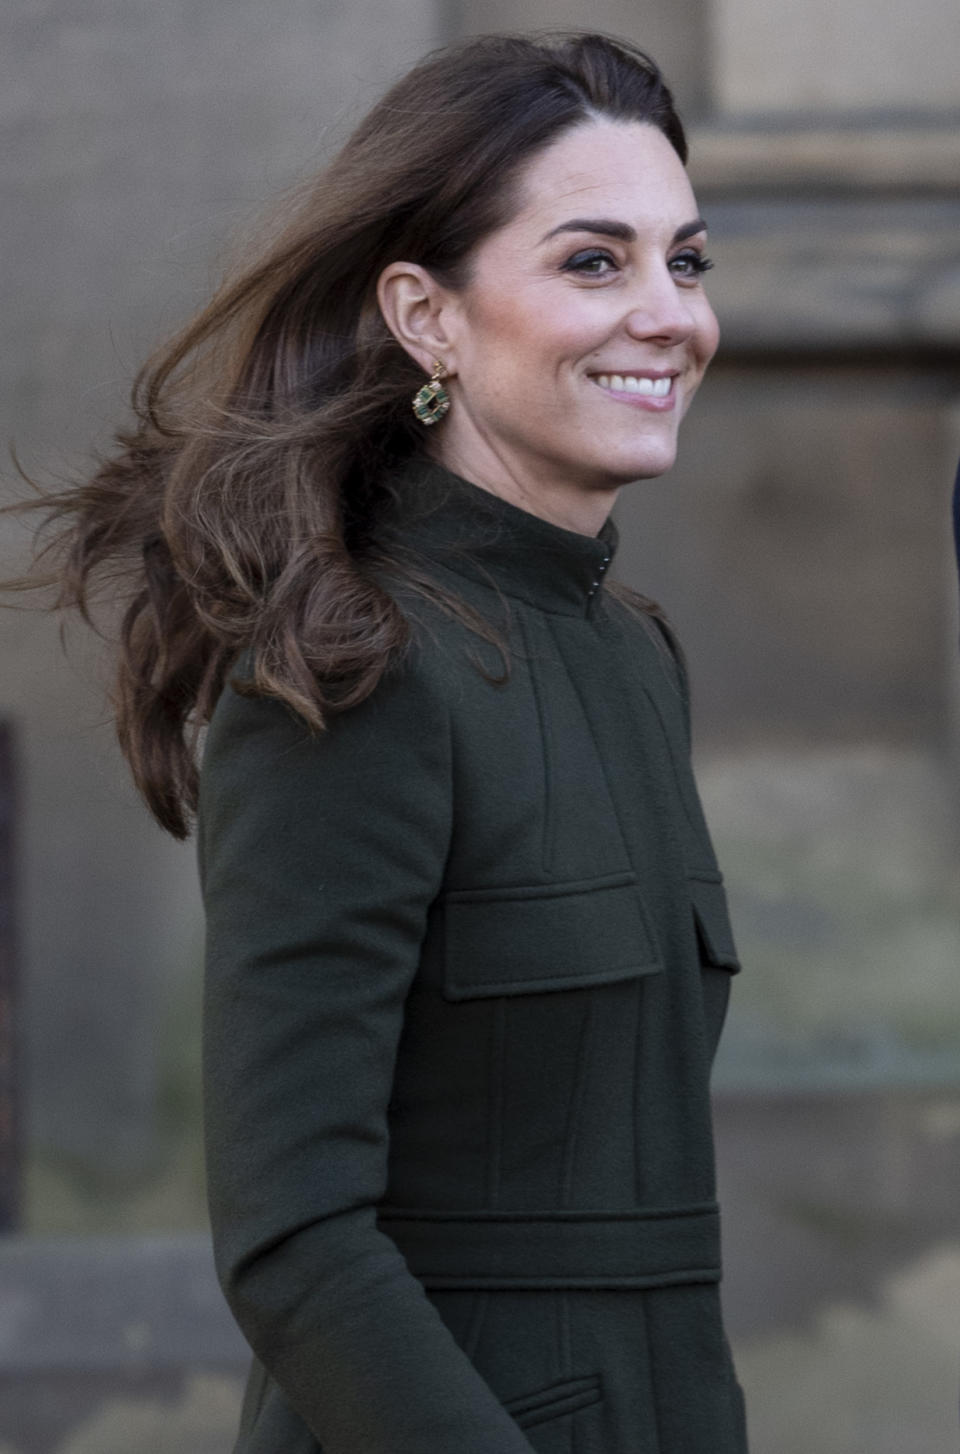 BRADFORD, ENGLAND - JANUARY 15: Catherine, Duchess of Cambridge visits City Hall in Bradfords Centenary Square where she met members of the public on a walkabout on January 15, 2020 in Bradford, United Kingdom. (Photo by Mark Cuthbert/UK Press via Getty Images)